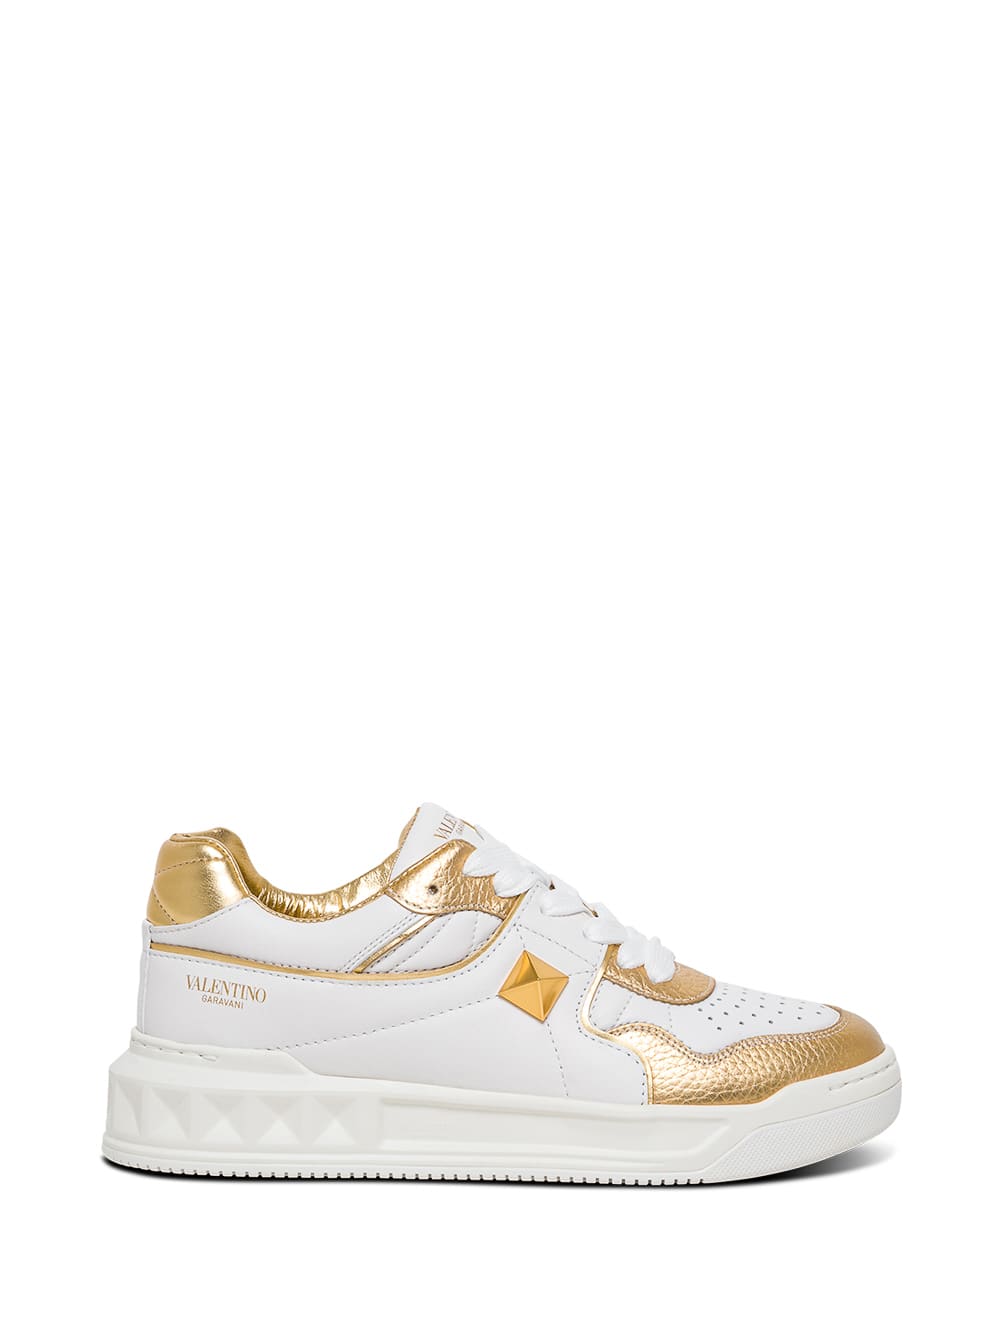 Valentino Garavani White And Gold Leather One Stud Sneakers